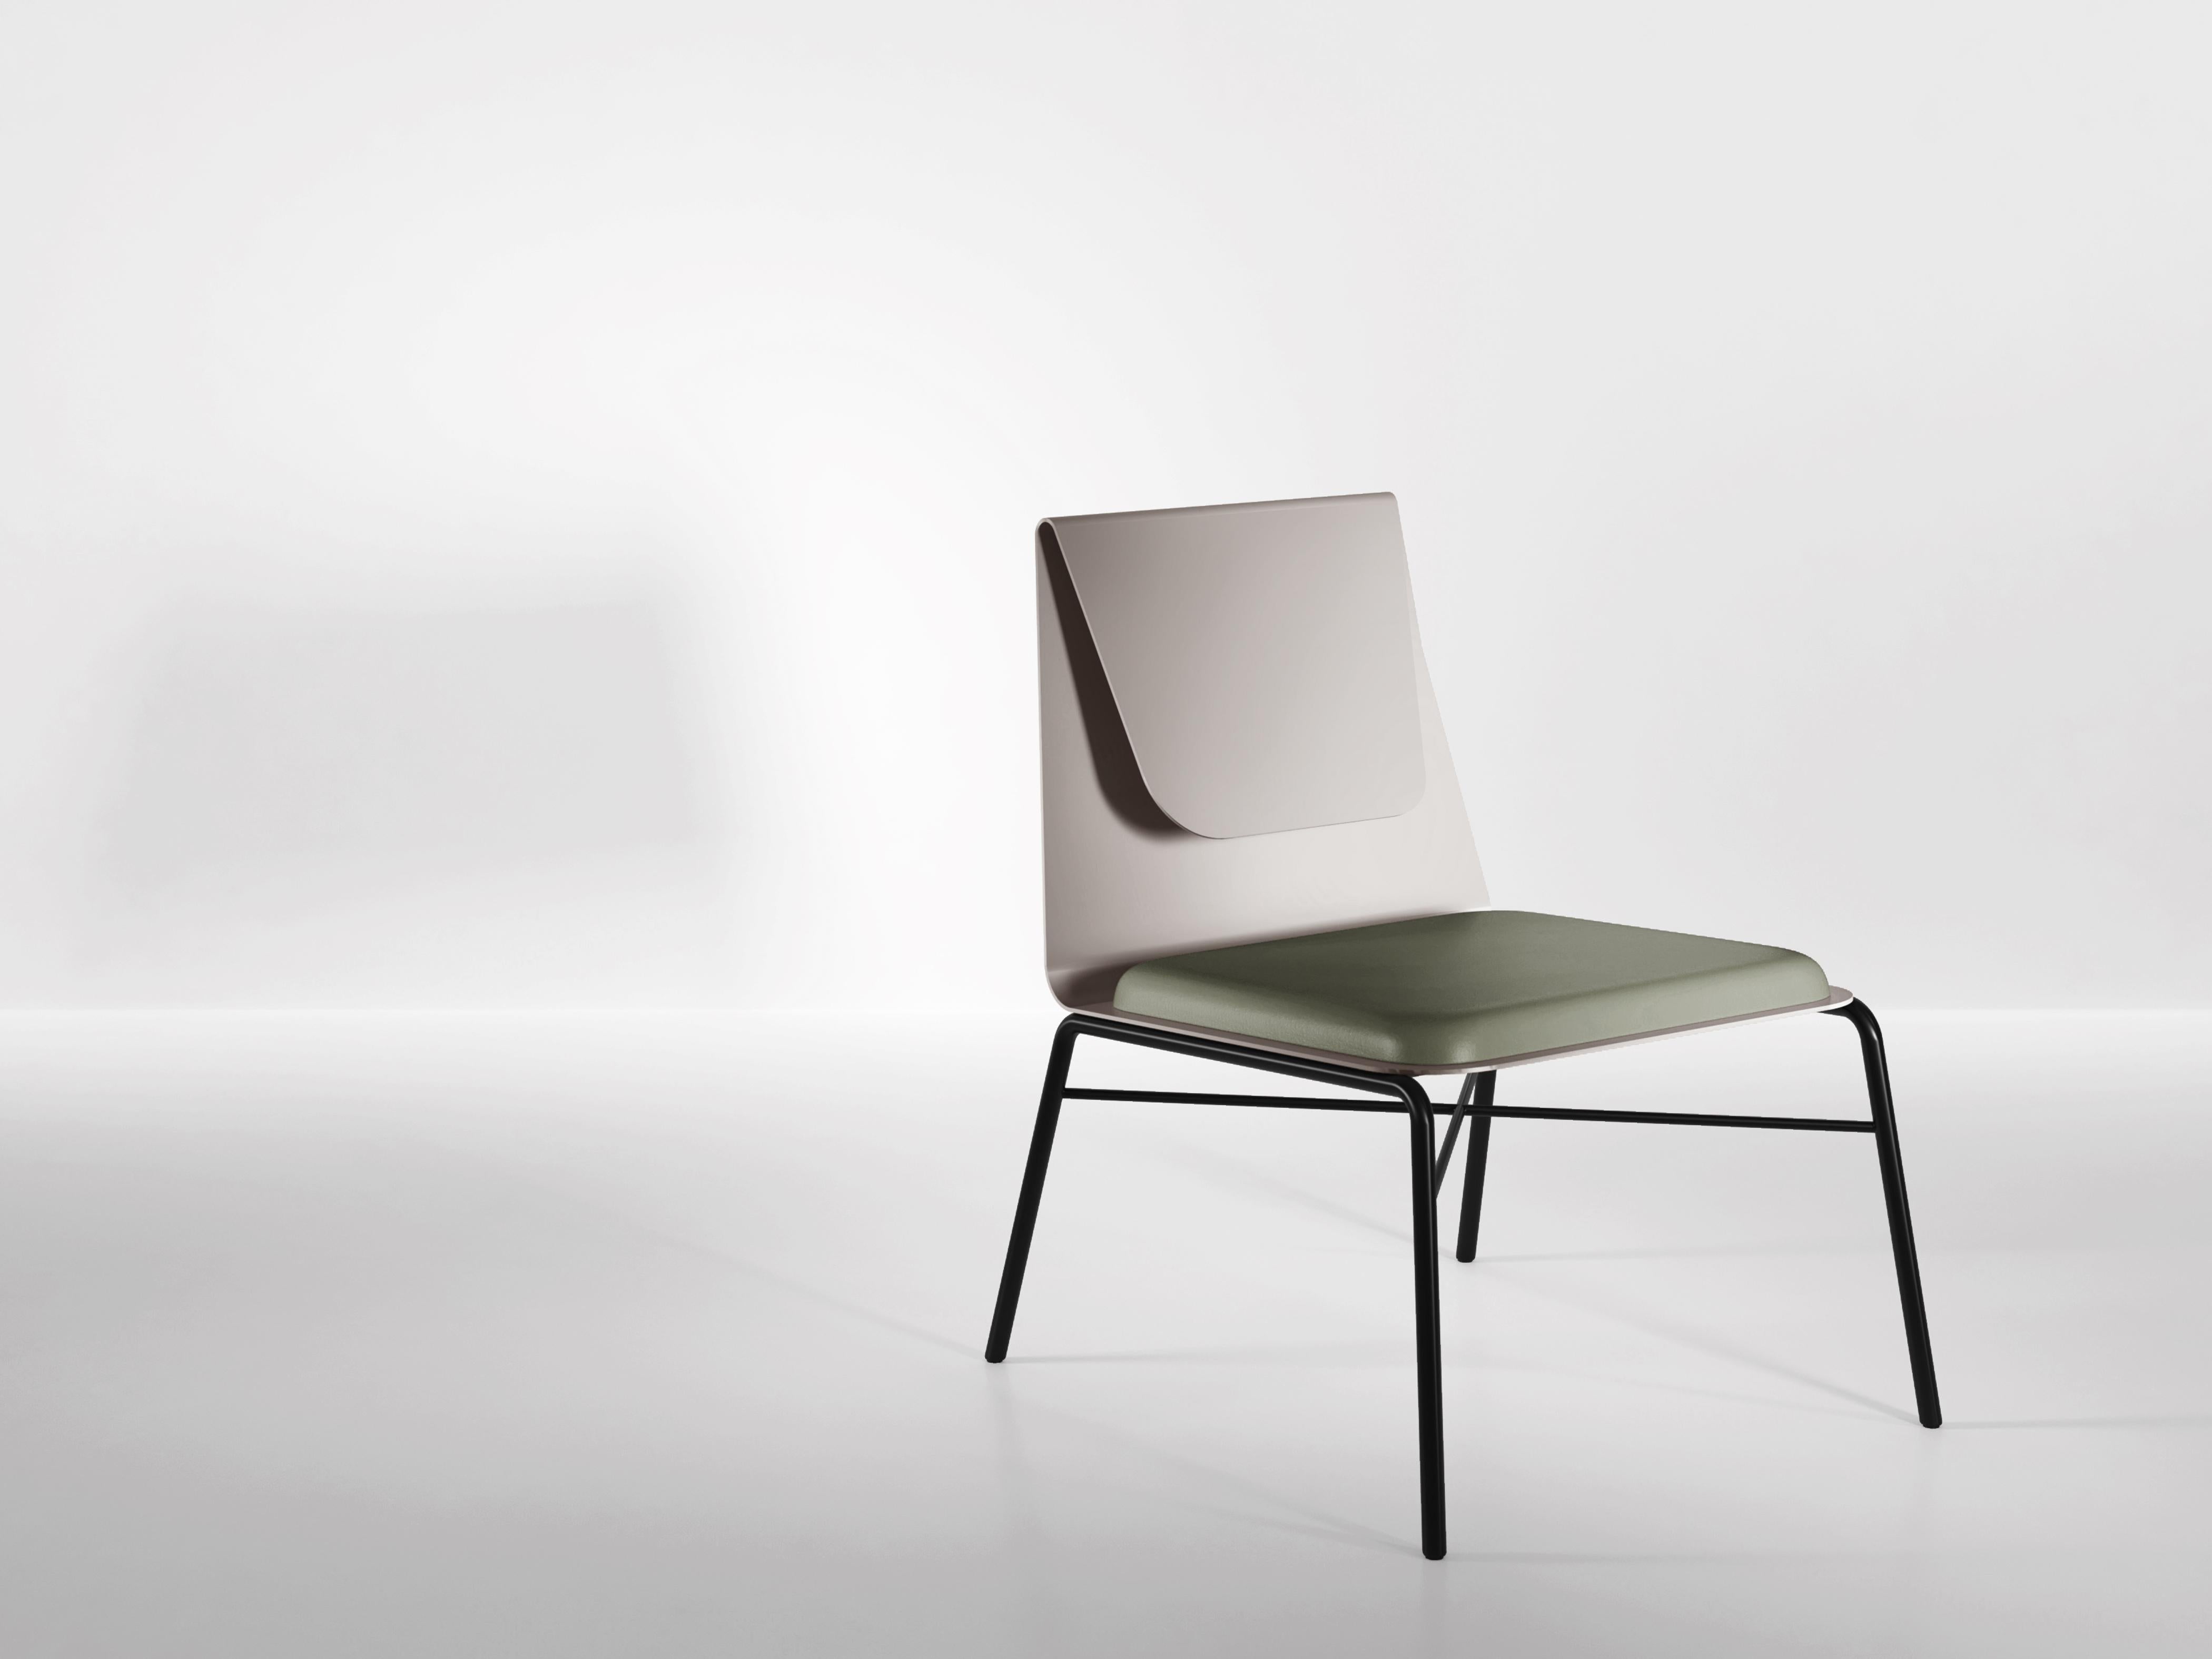 The fold lounge chair is constructed from one piece of metal bent in two places to offer both support and flexibility when leaned upon. A fully customizable, upholstered cushion sits on top of the metal for added comfort. The seat is supported by